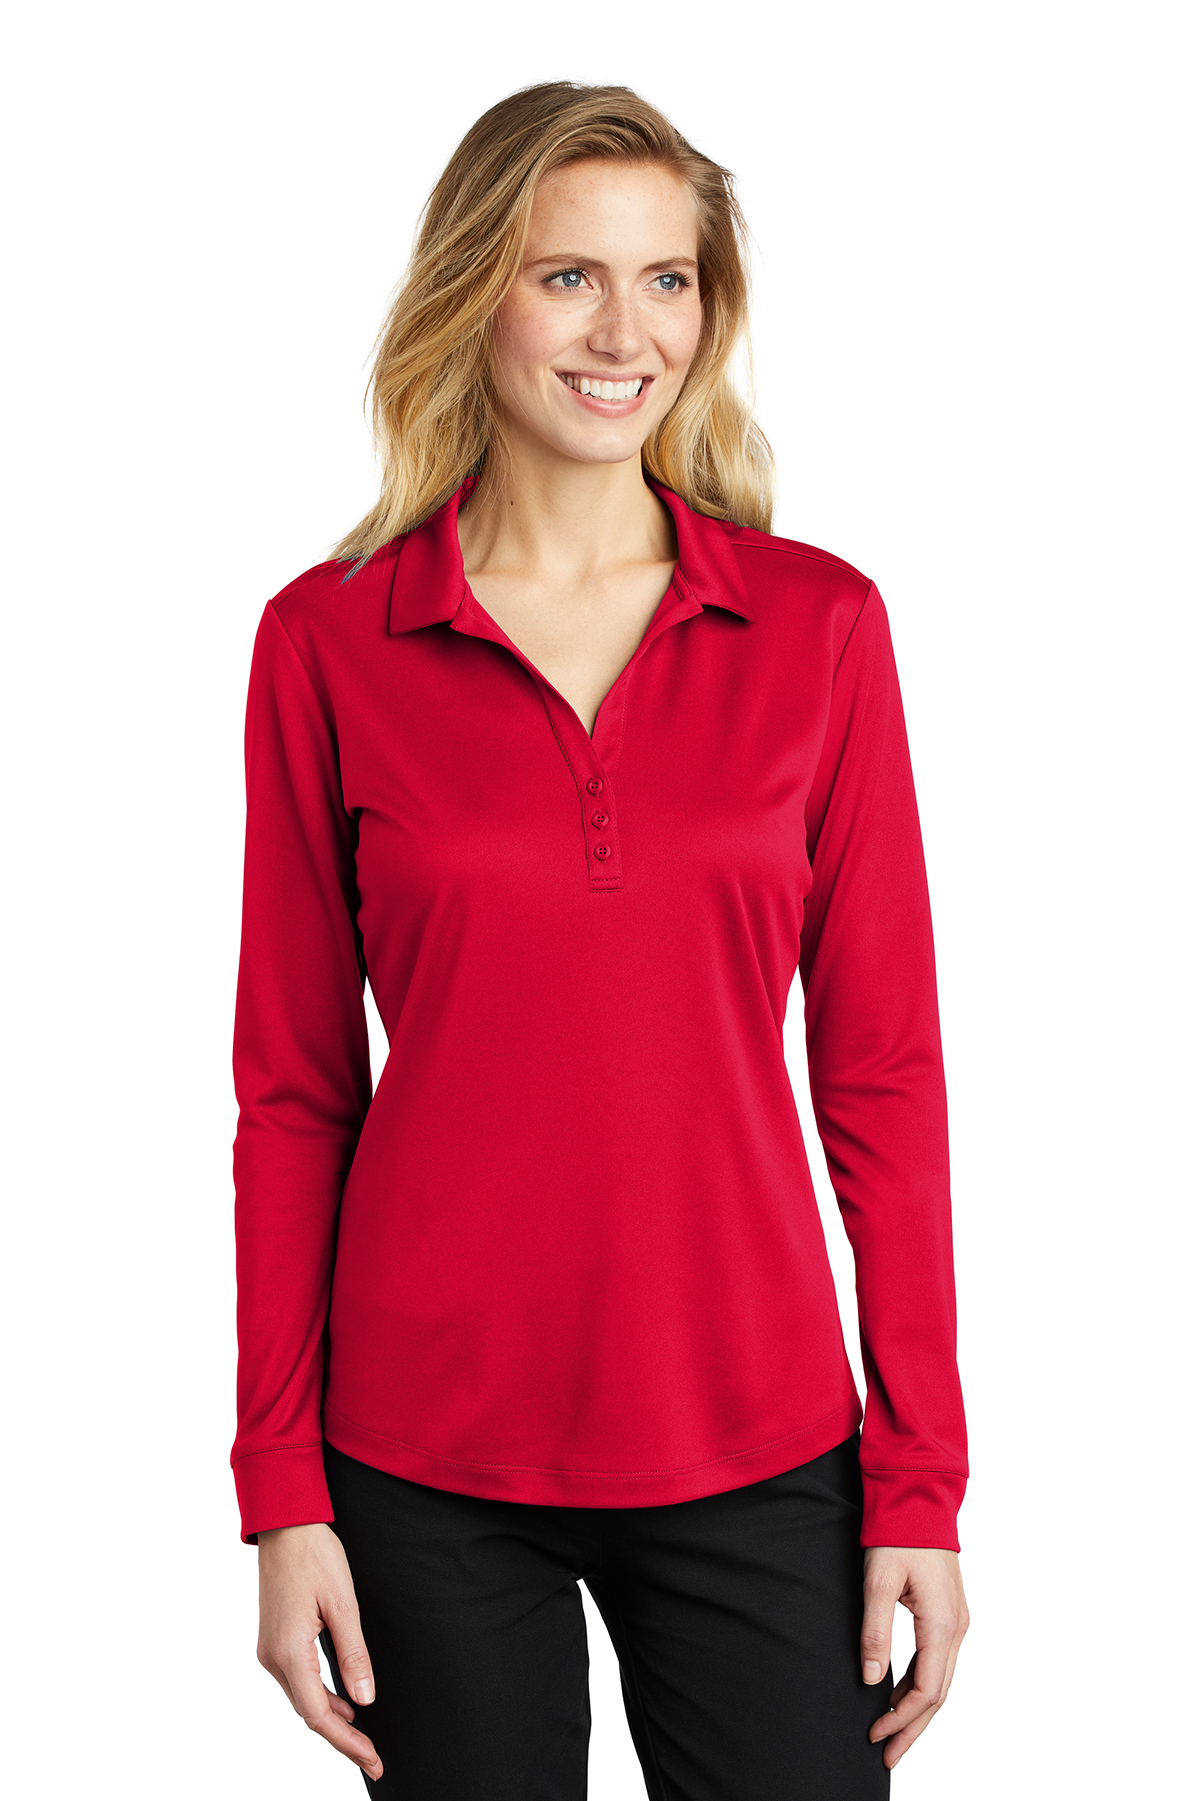 Silk Performance Authority Ladies Product Authority Sleeve | Port | Long Port Touch™ Polo